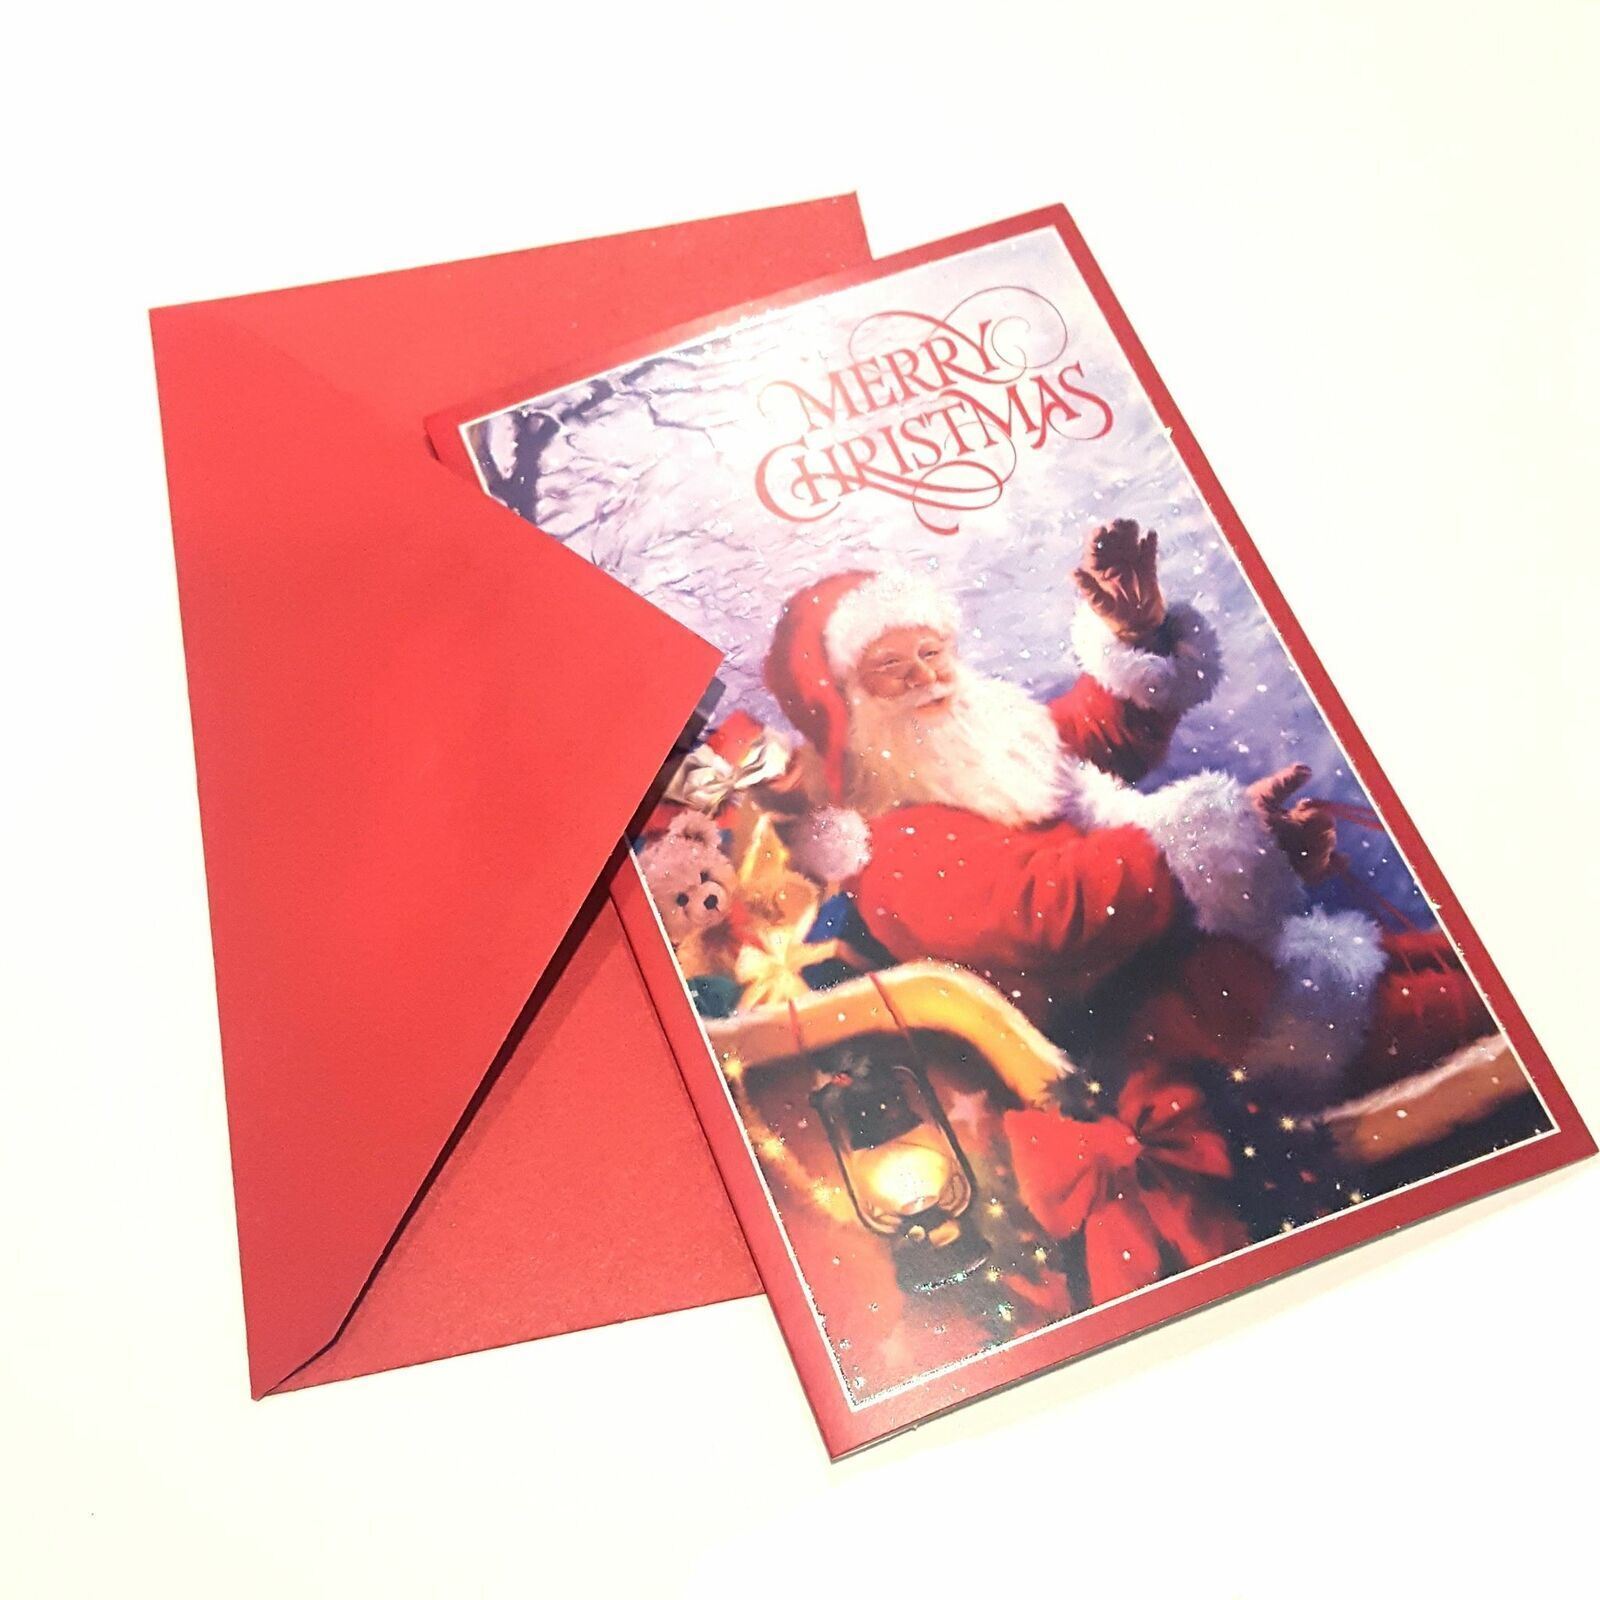 Merry Christmas Greeting Card Santa Claus Holiday Wishes Card Gift